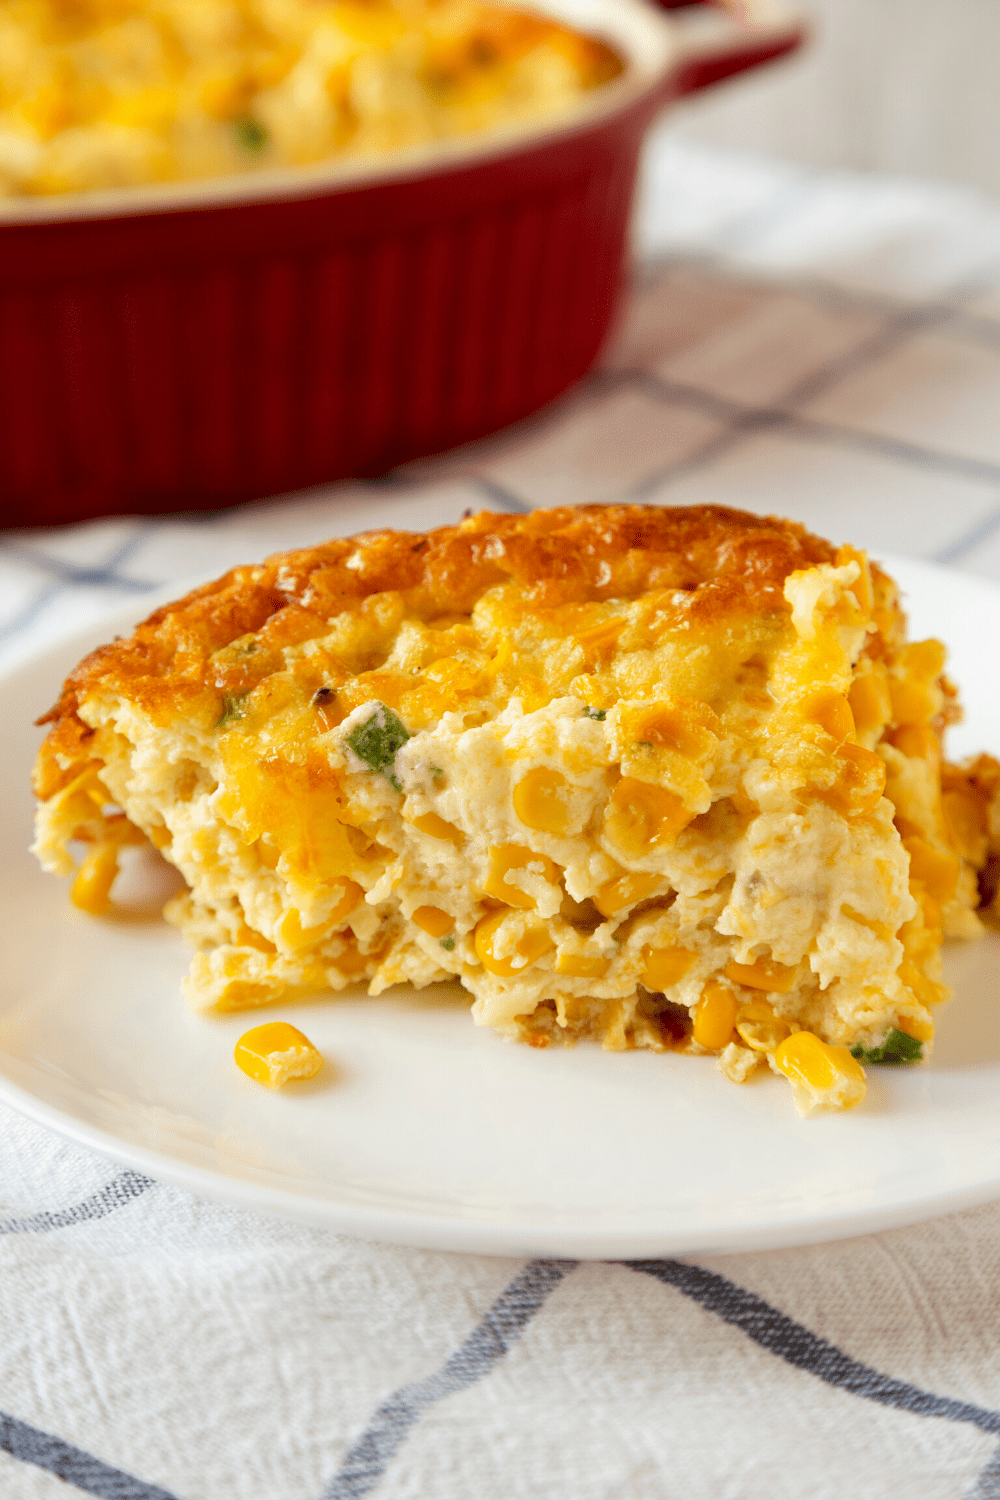 Slice of Cheddar and Corn Pudding on a plate